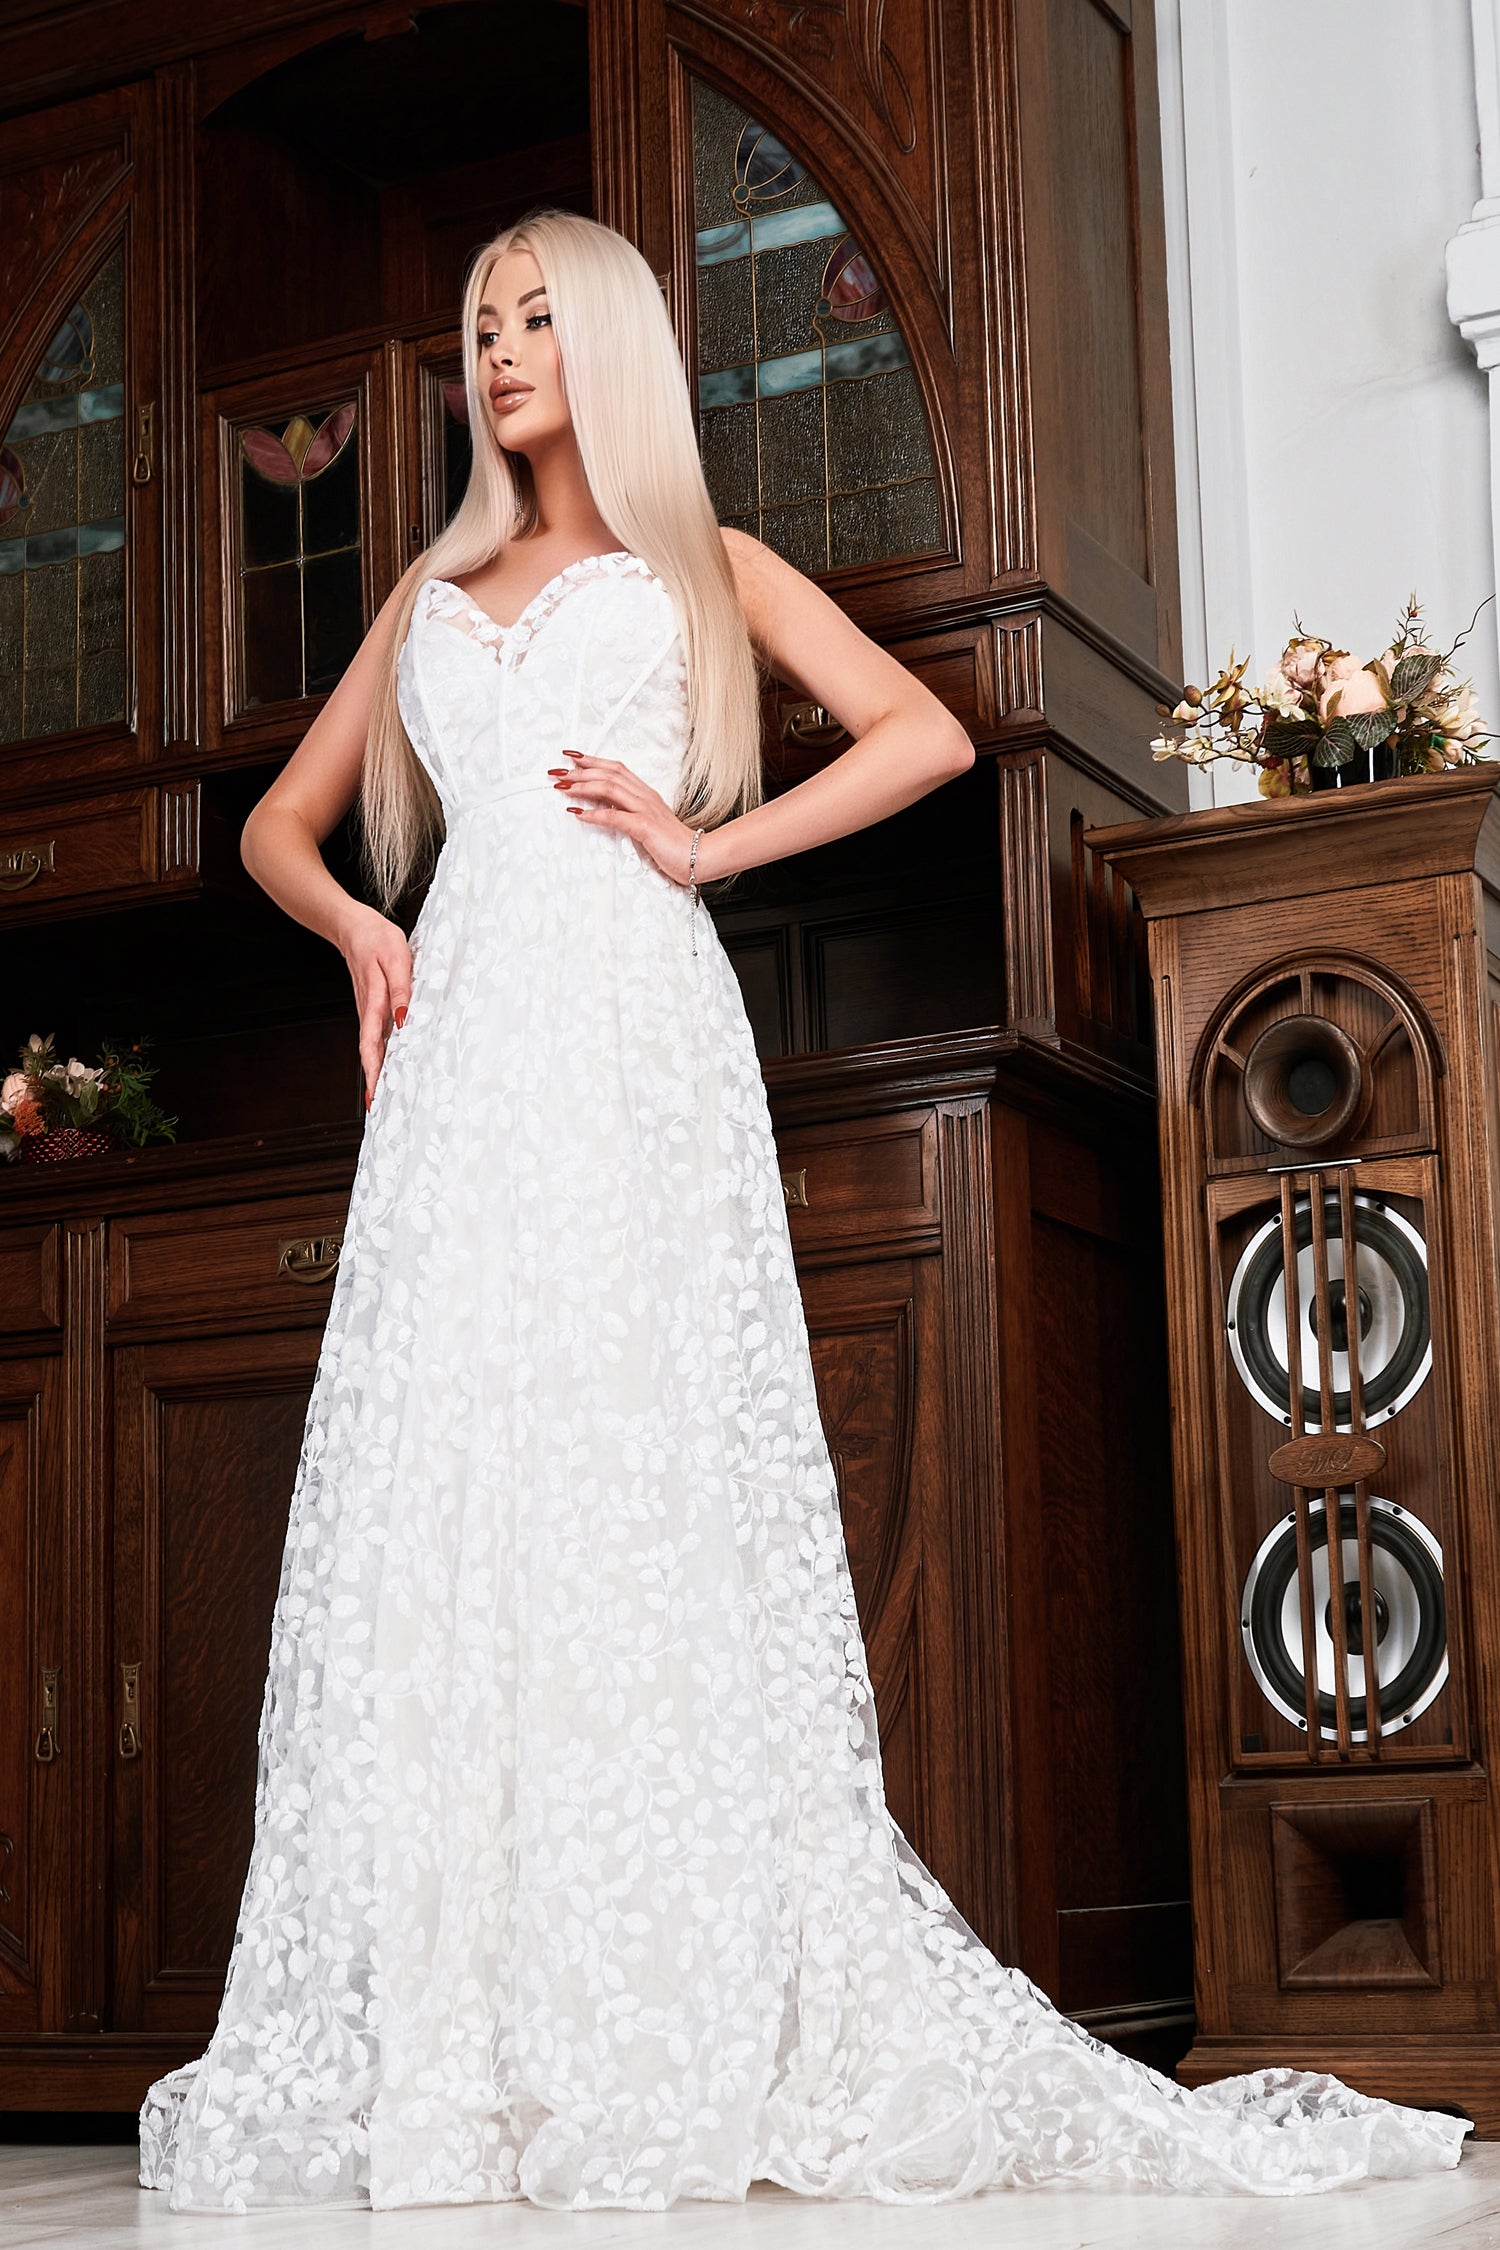 Tina Holly Couture TK069W White & White Lace A-Line Wedding Dress